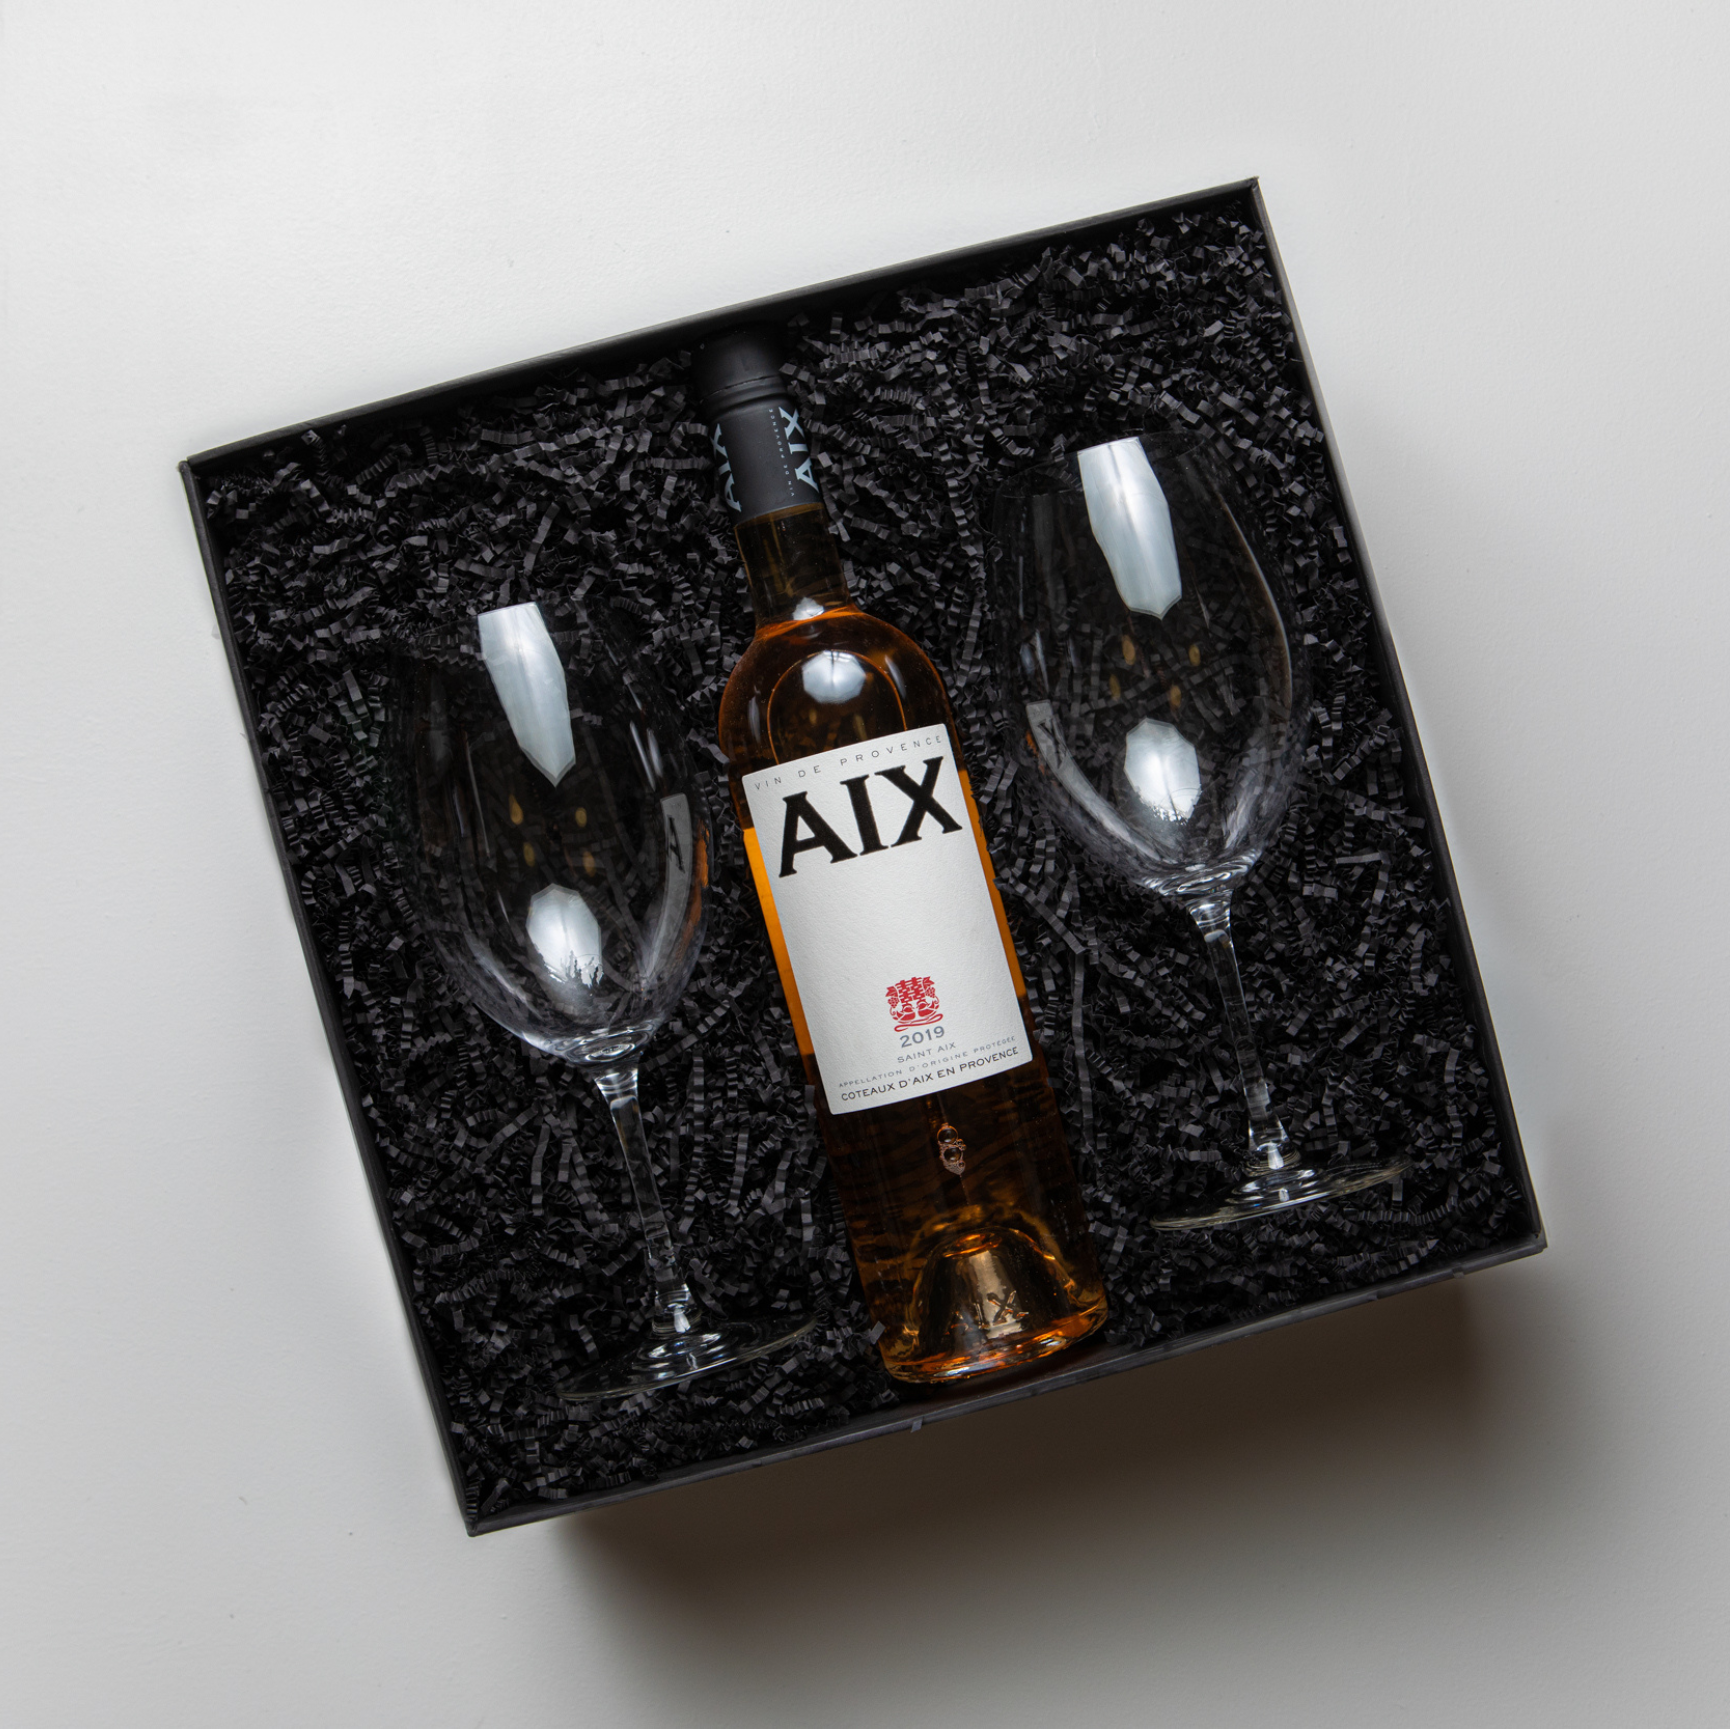 AIX Gift box which includes AIX Rosé and a set of 2 vintage ref wine glasses by Plumm